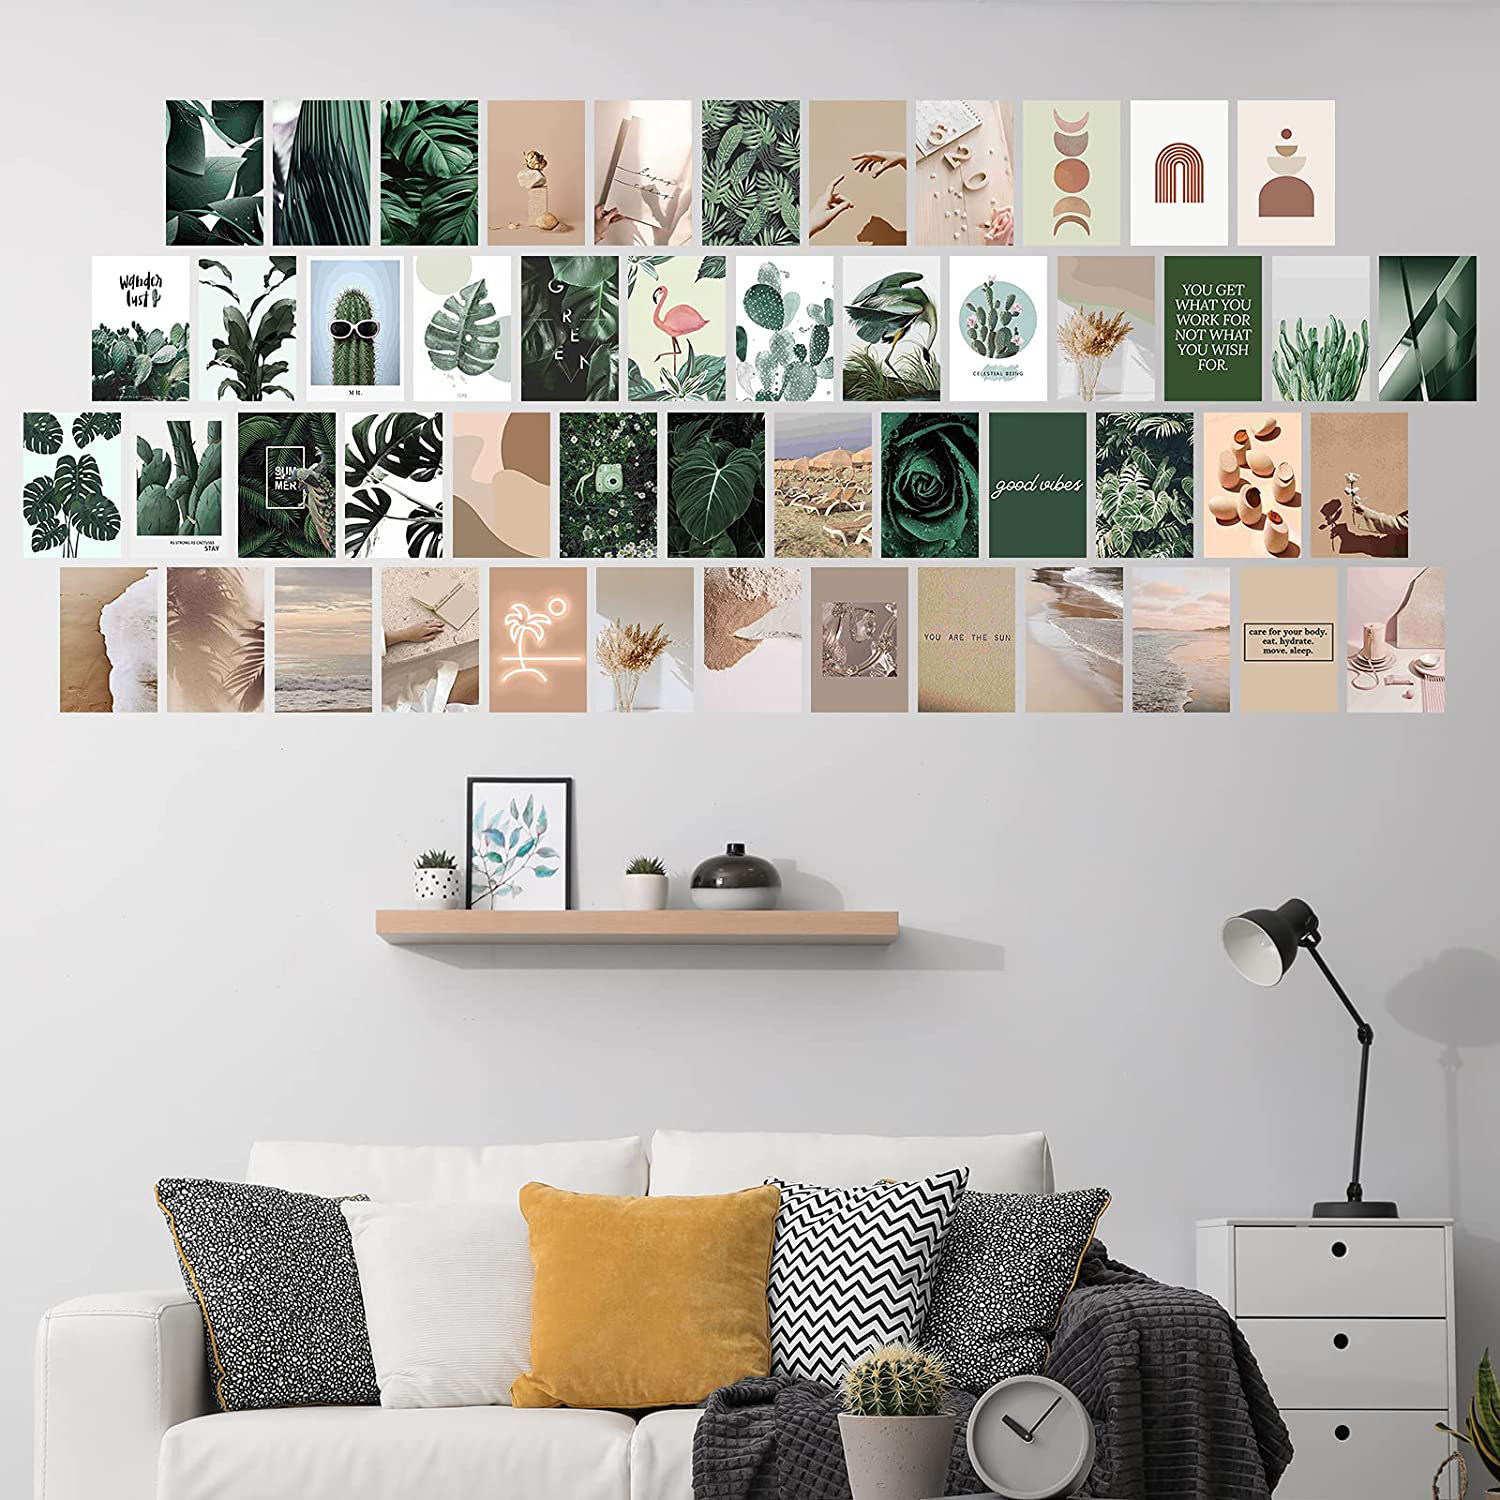 50 Pcs Vintage Wall Collage Kit Aesthetic Pictures, Photo Wall Collage Kit, Collage Kit for Wall Aesthetic, Cottagecore Room Decor for Bedroom Aesthetic, Vintage Wall Decor, Dorm Posters 4x6 Inch